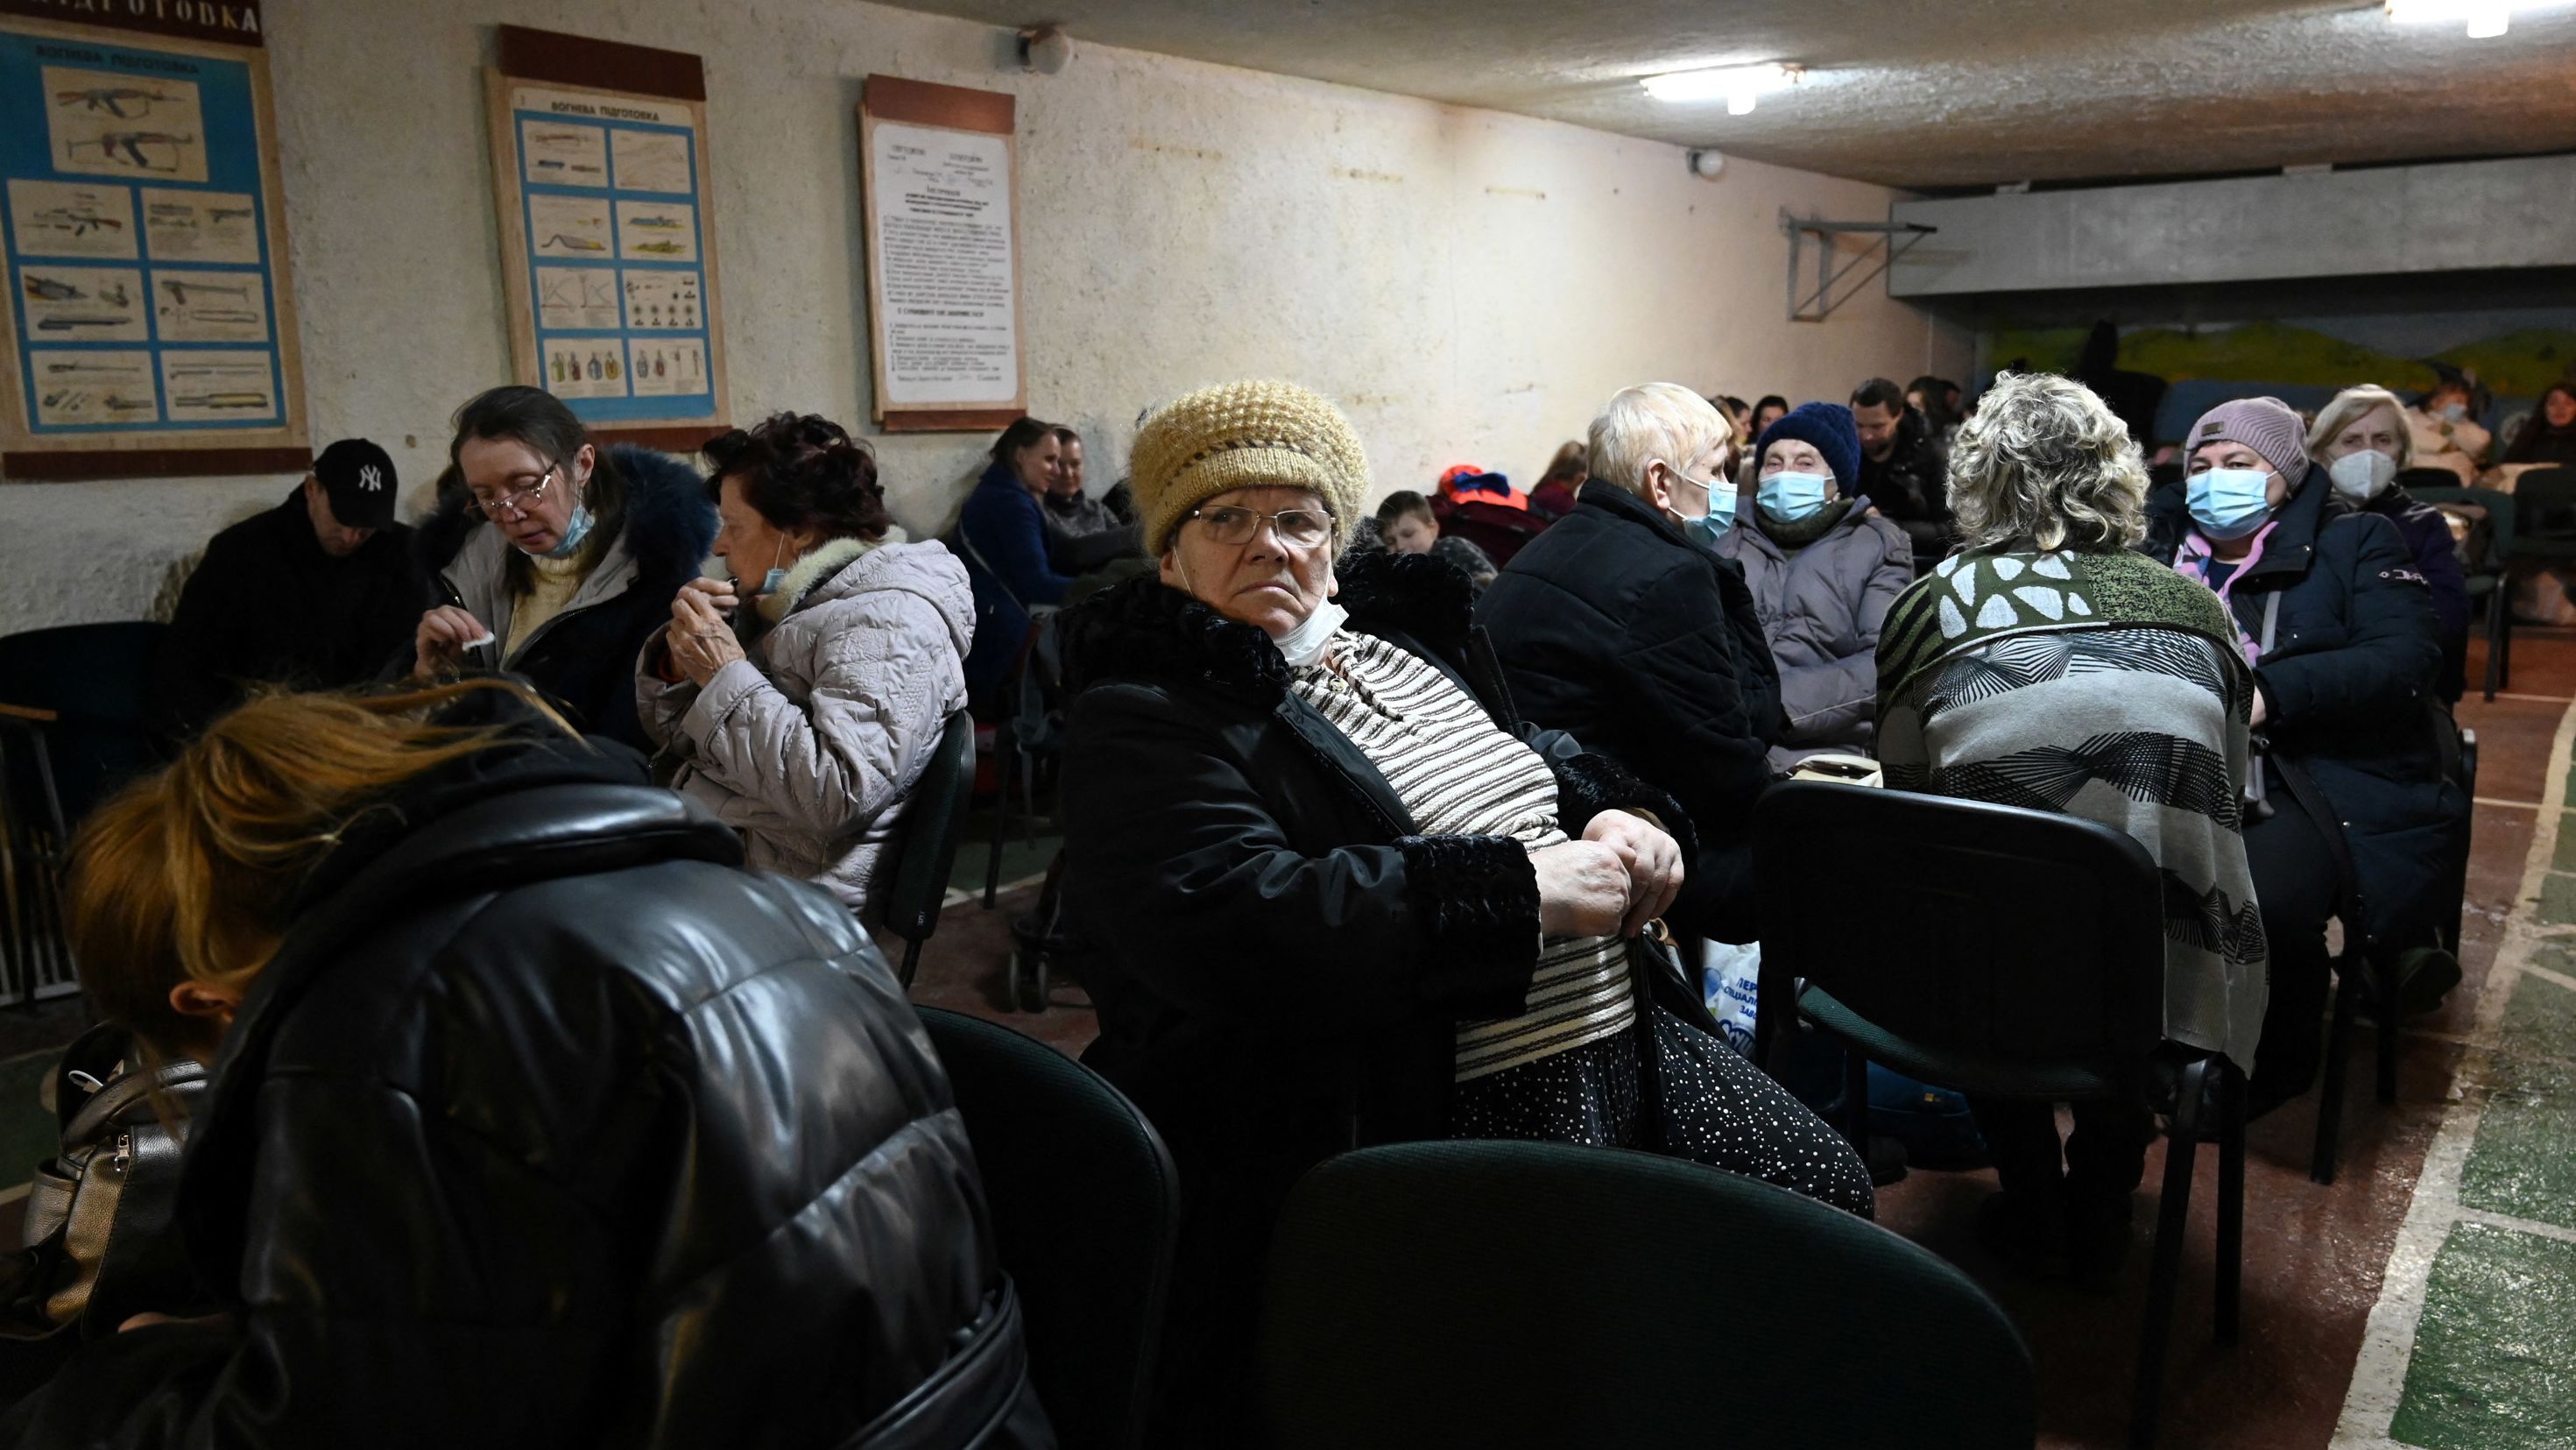 People gather in an air raid shelter in Kyiv, Ukraine on February 24, 2022.  